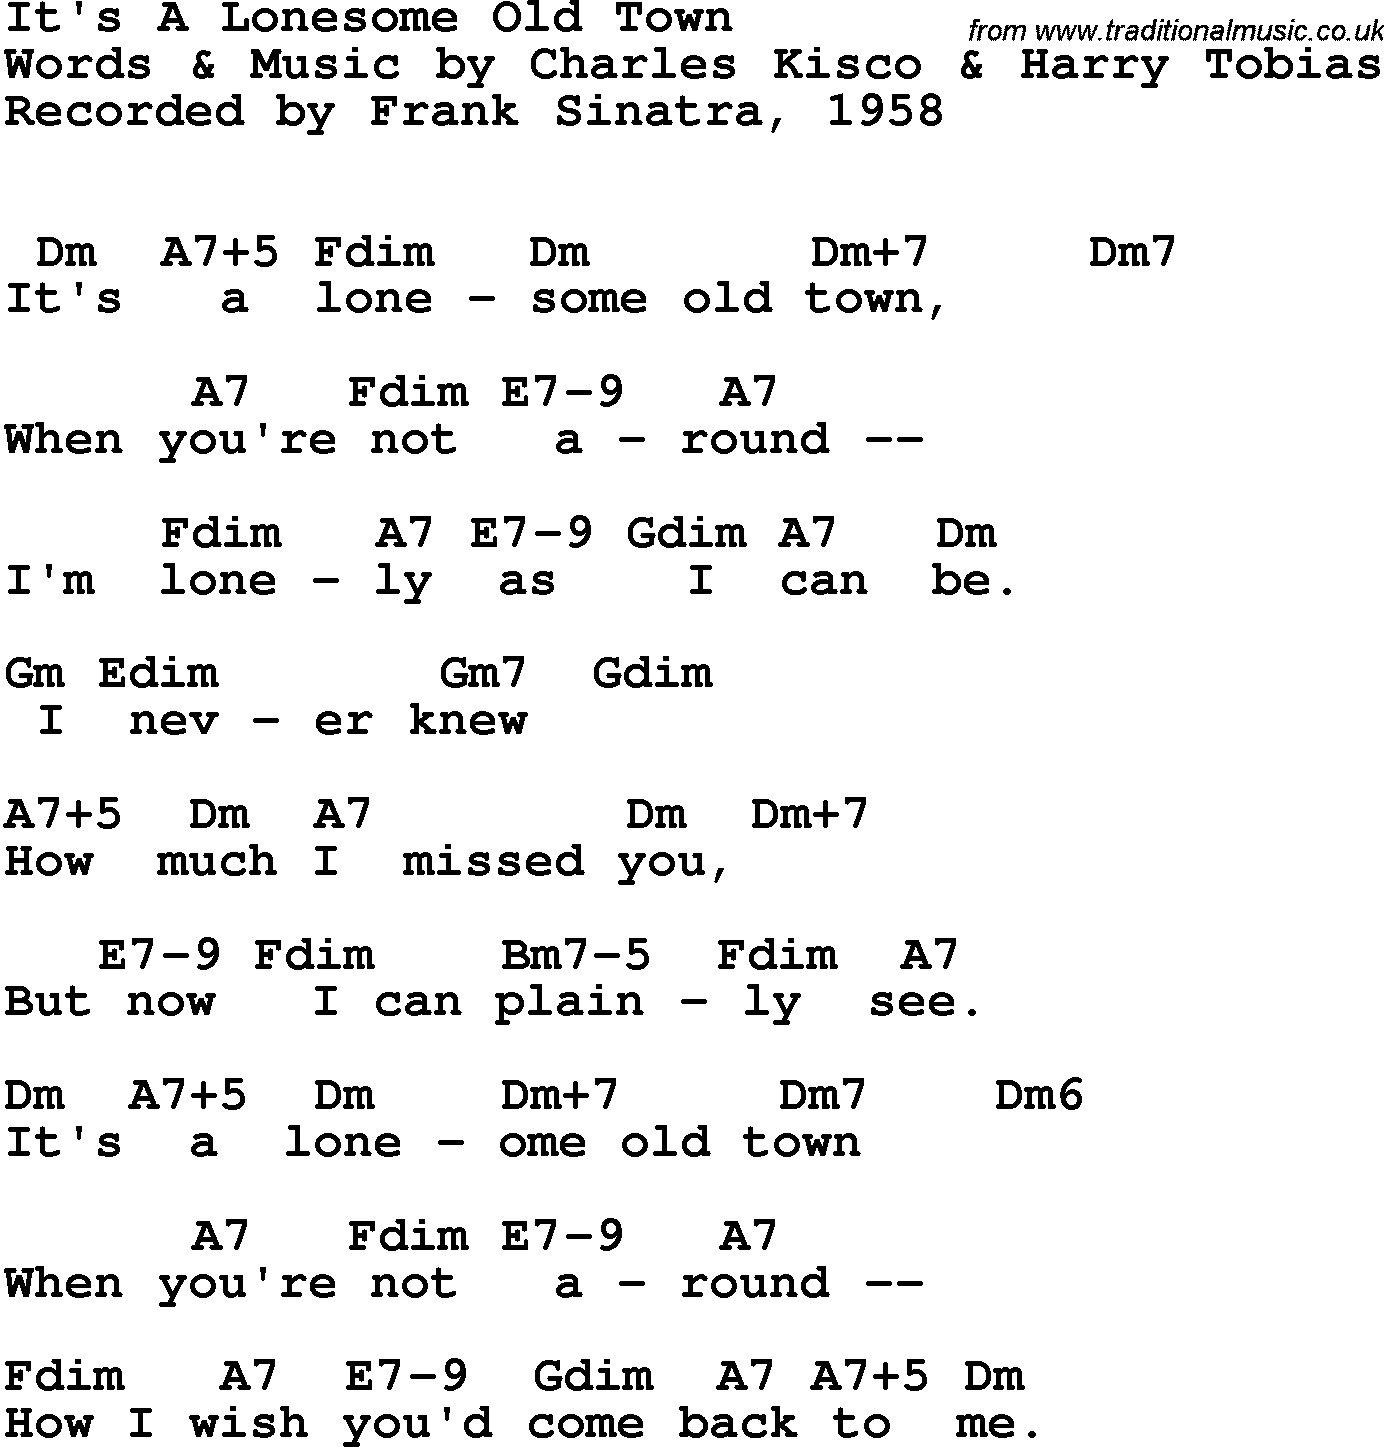 Song Lyrics with guitar chords for It's A Lonesome Old Town - Frank Sinatra, 1958